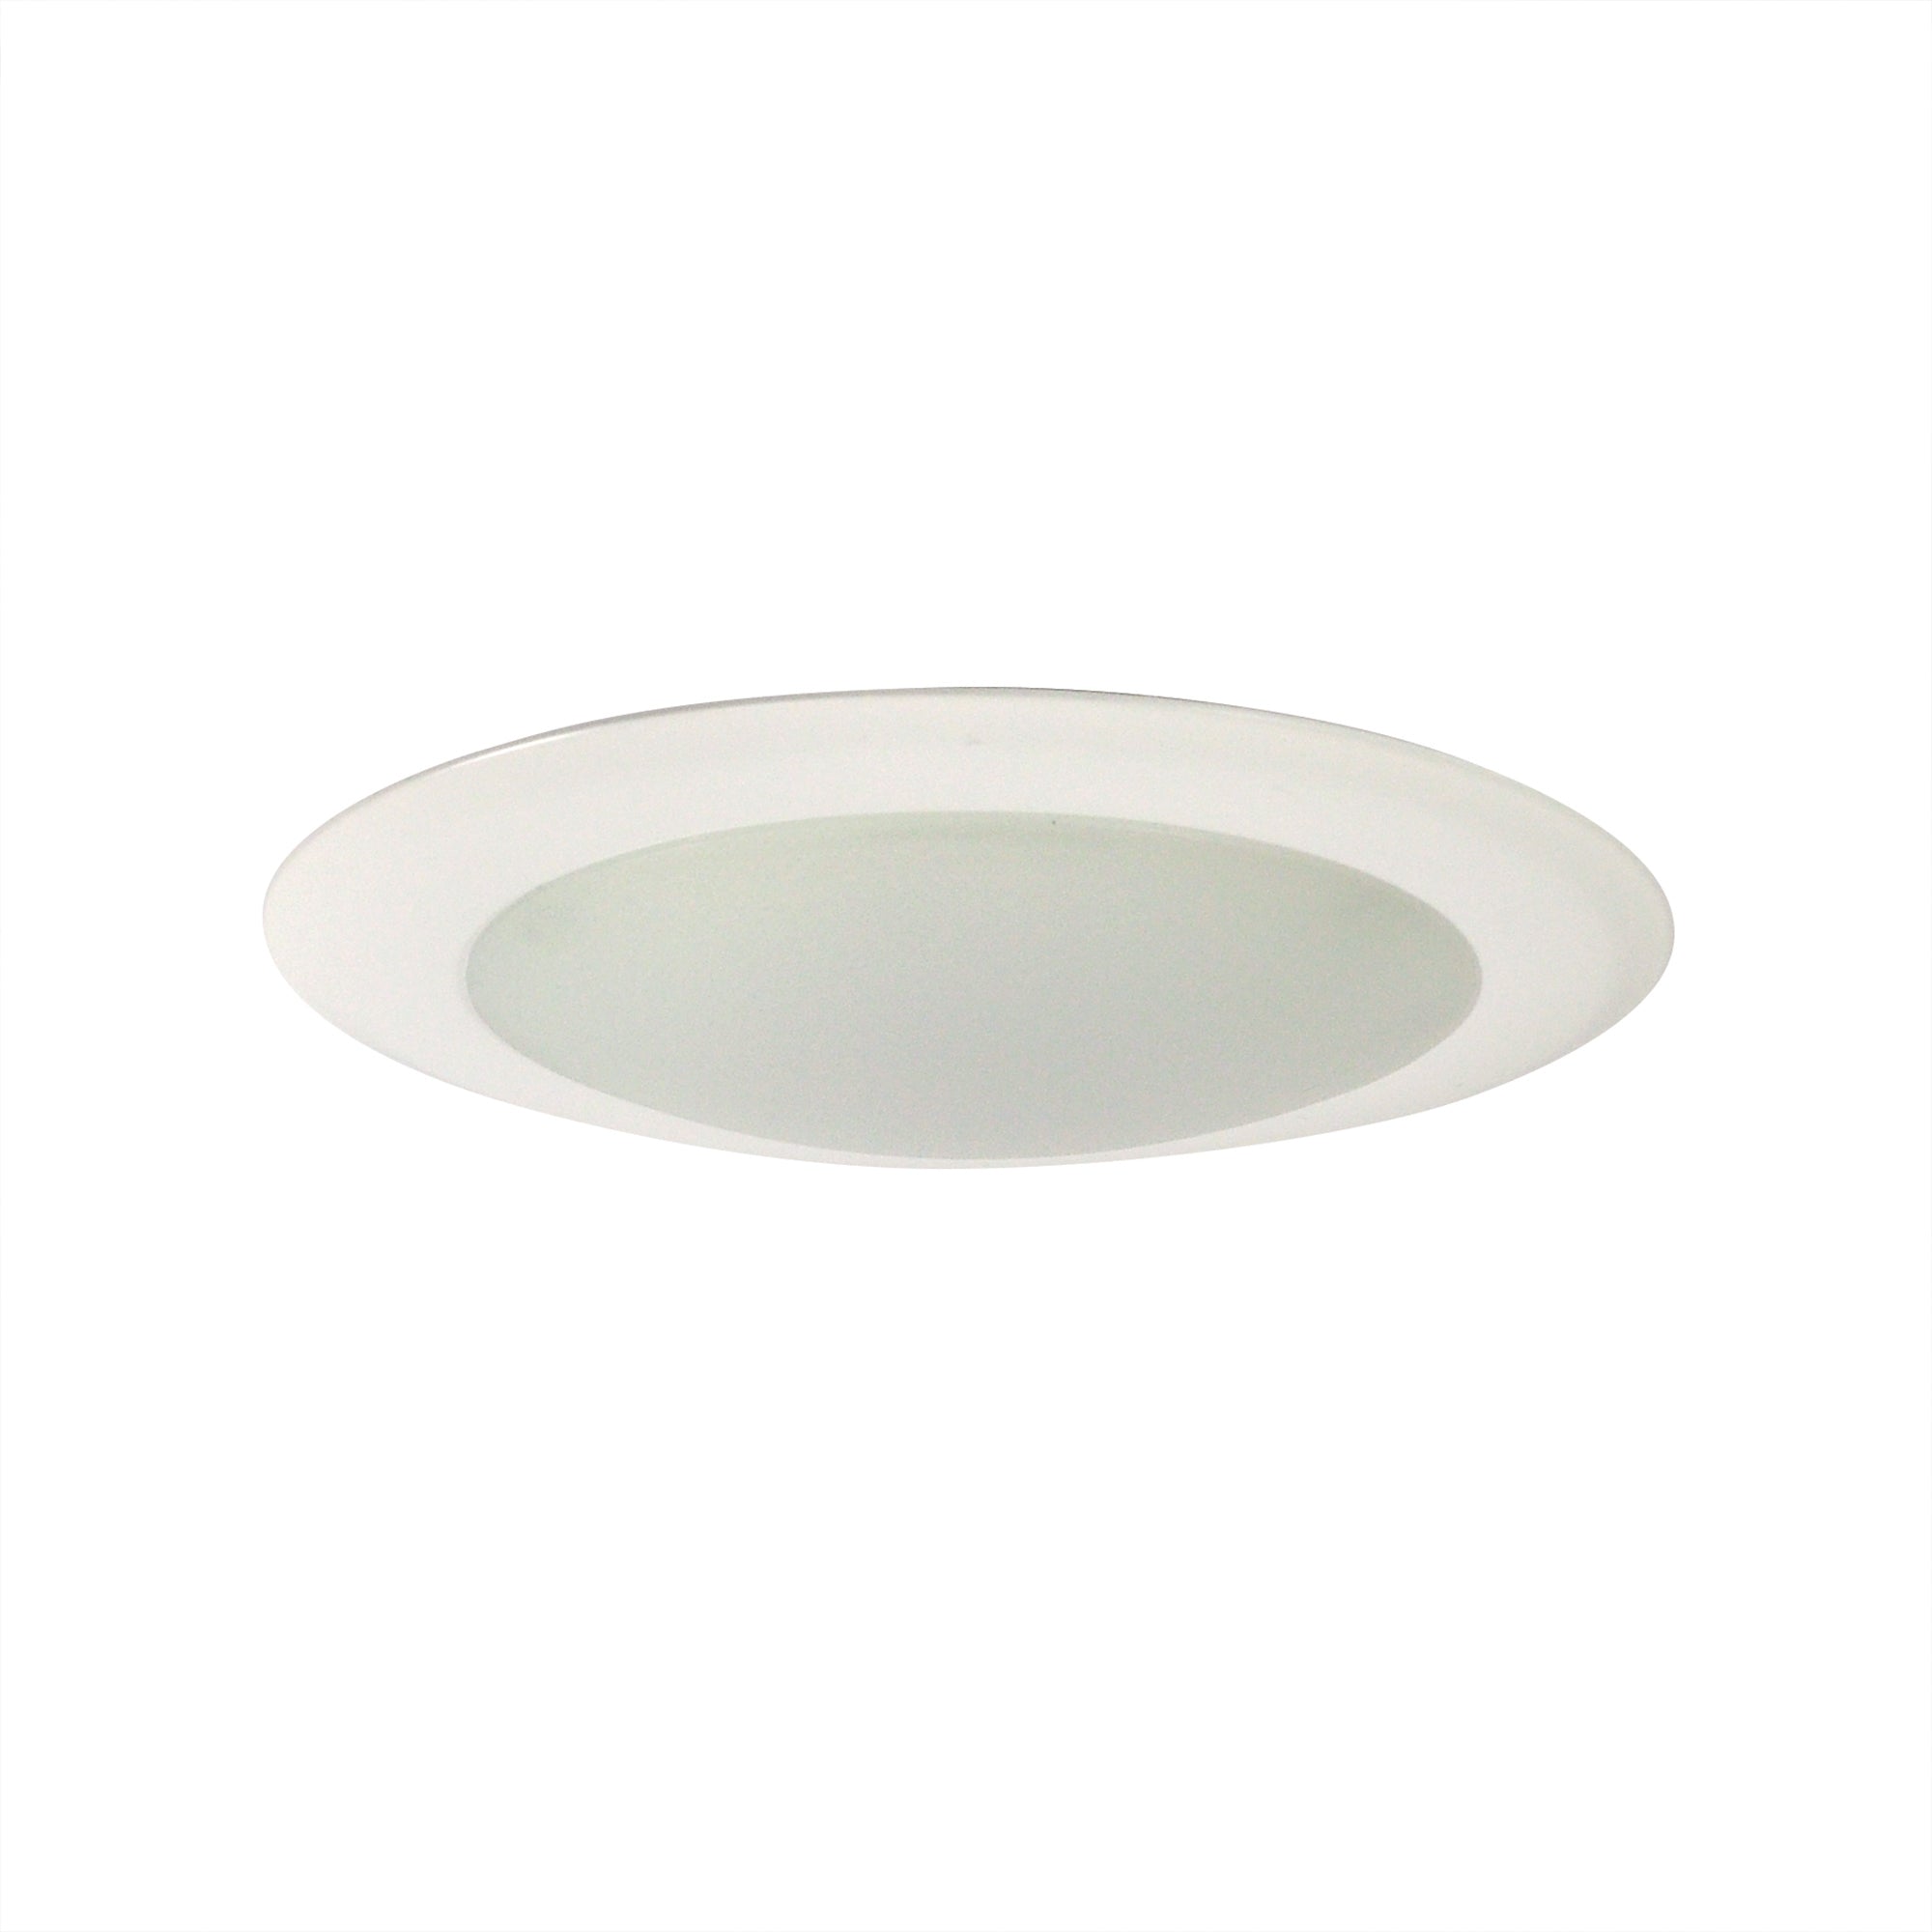 Nora Lighting NLOPAC - NLOPAC-R6509T2430W - 6 Inch AC Opal - LED Surface Mount Light Fixture, 1150lm, 16.5W, 3000K, White